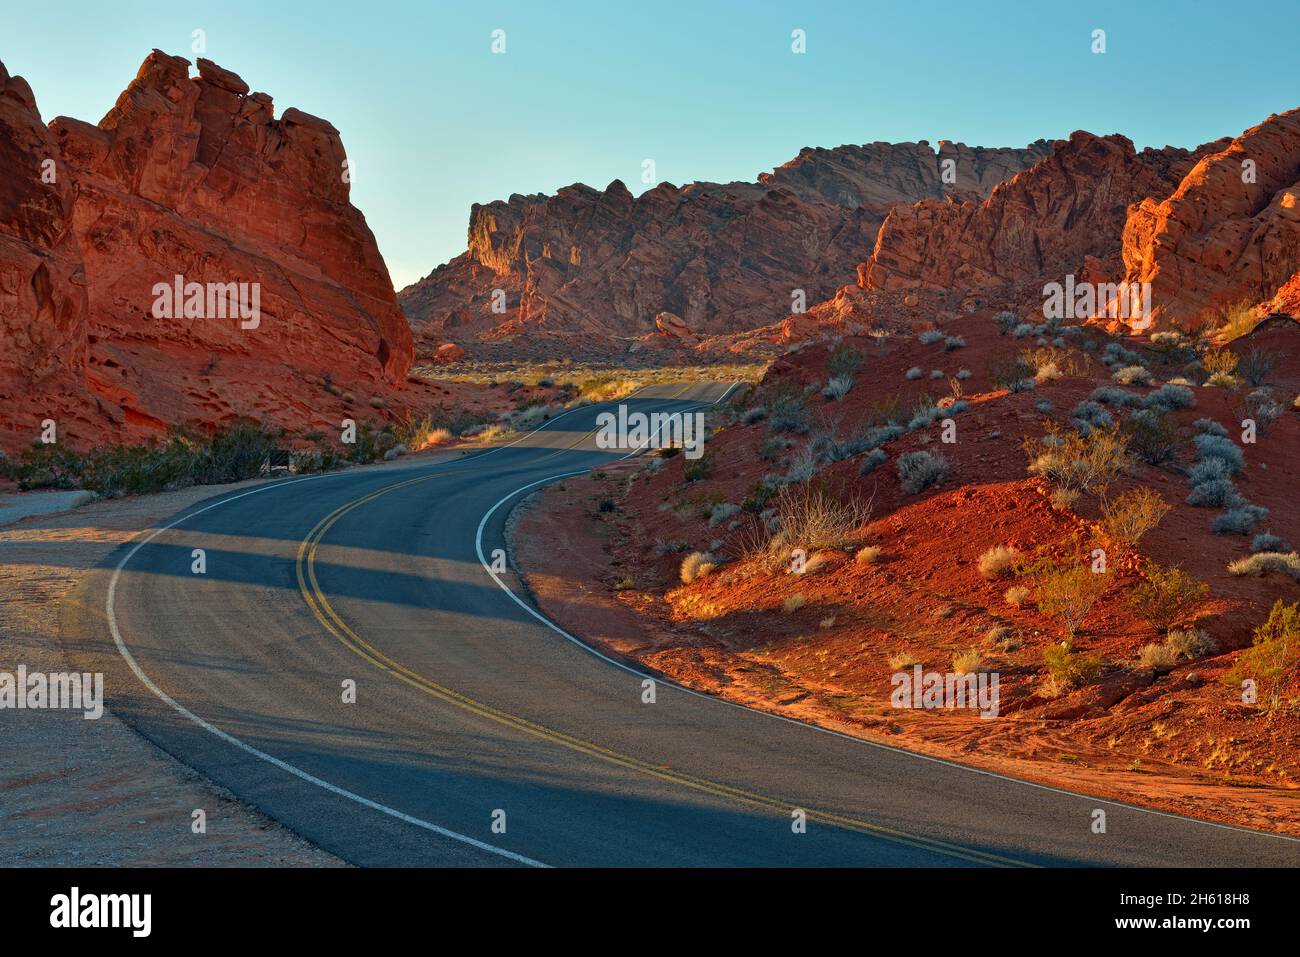 The Scenic Drive, Valley of Fire State Park, Nevada, USA Stockfoto